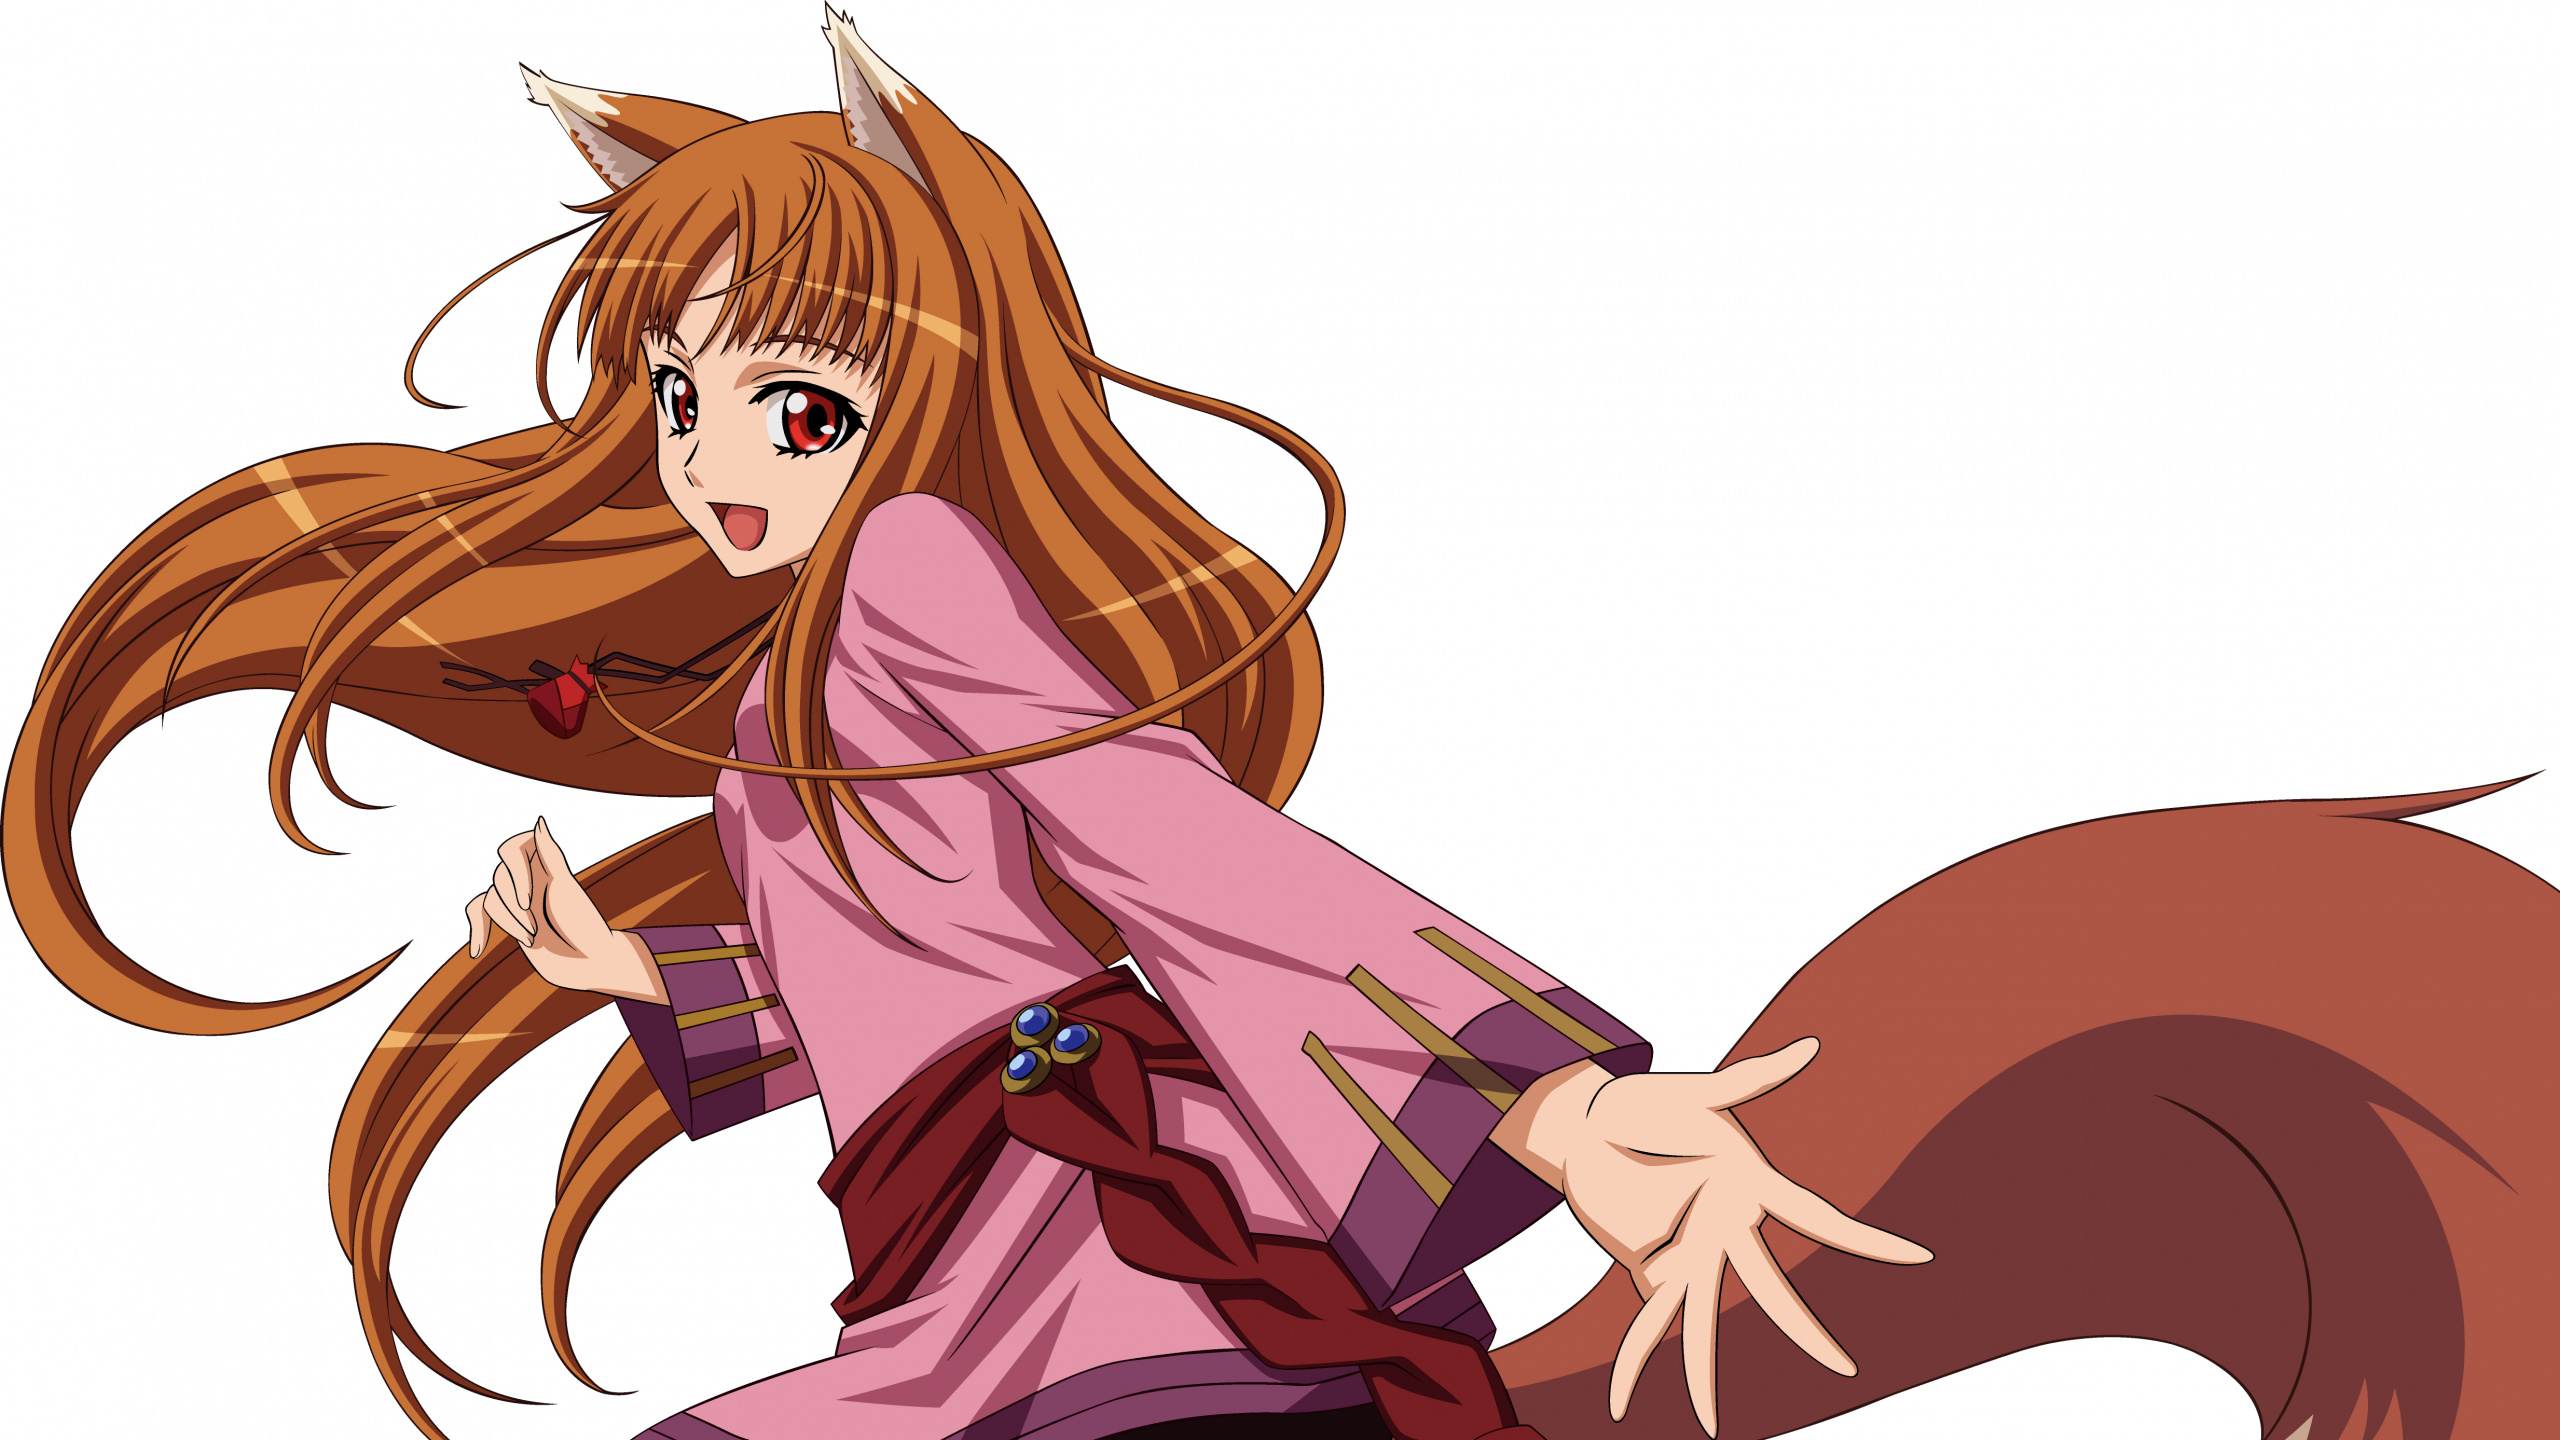 Fille Aux Cheveux Blonds en Robe Rose Personnage Anime. Wallpaper in 2560x1440 Resolution